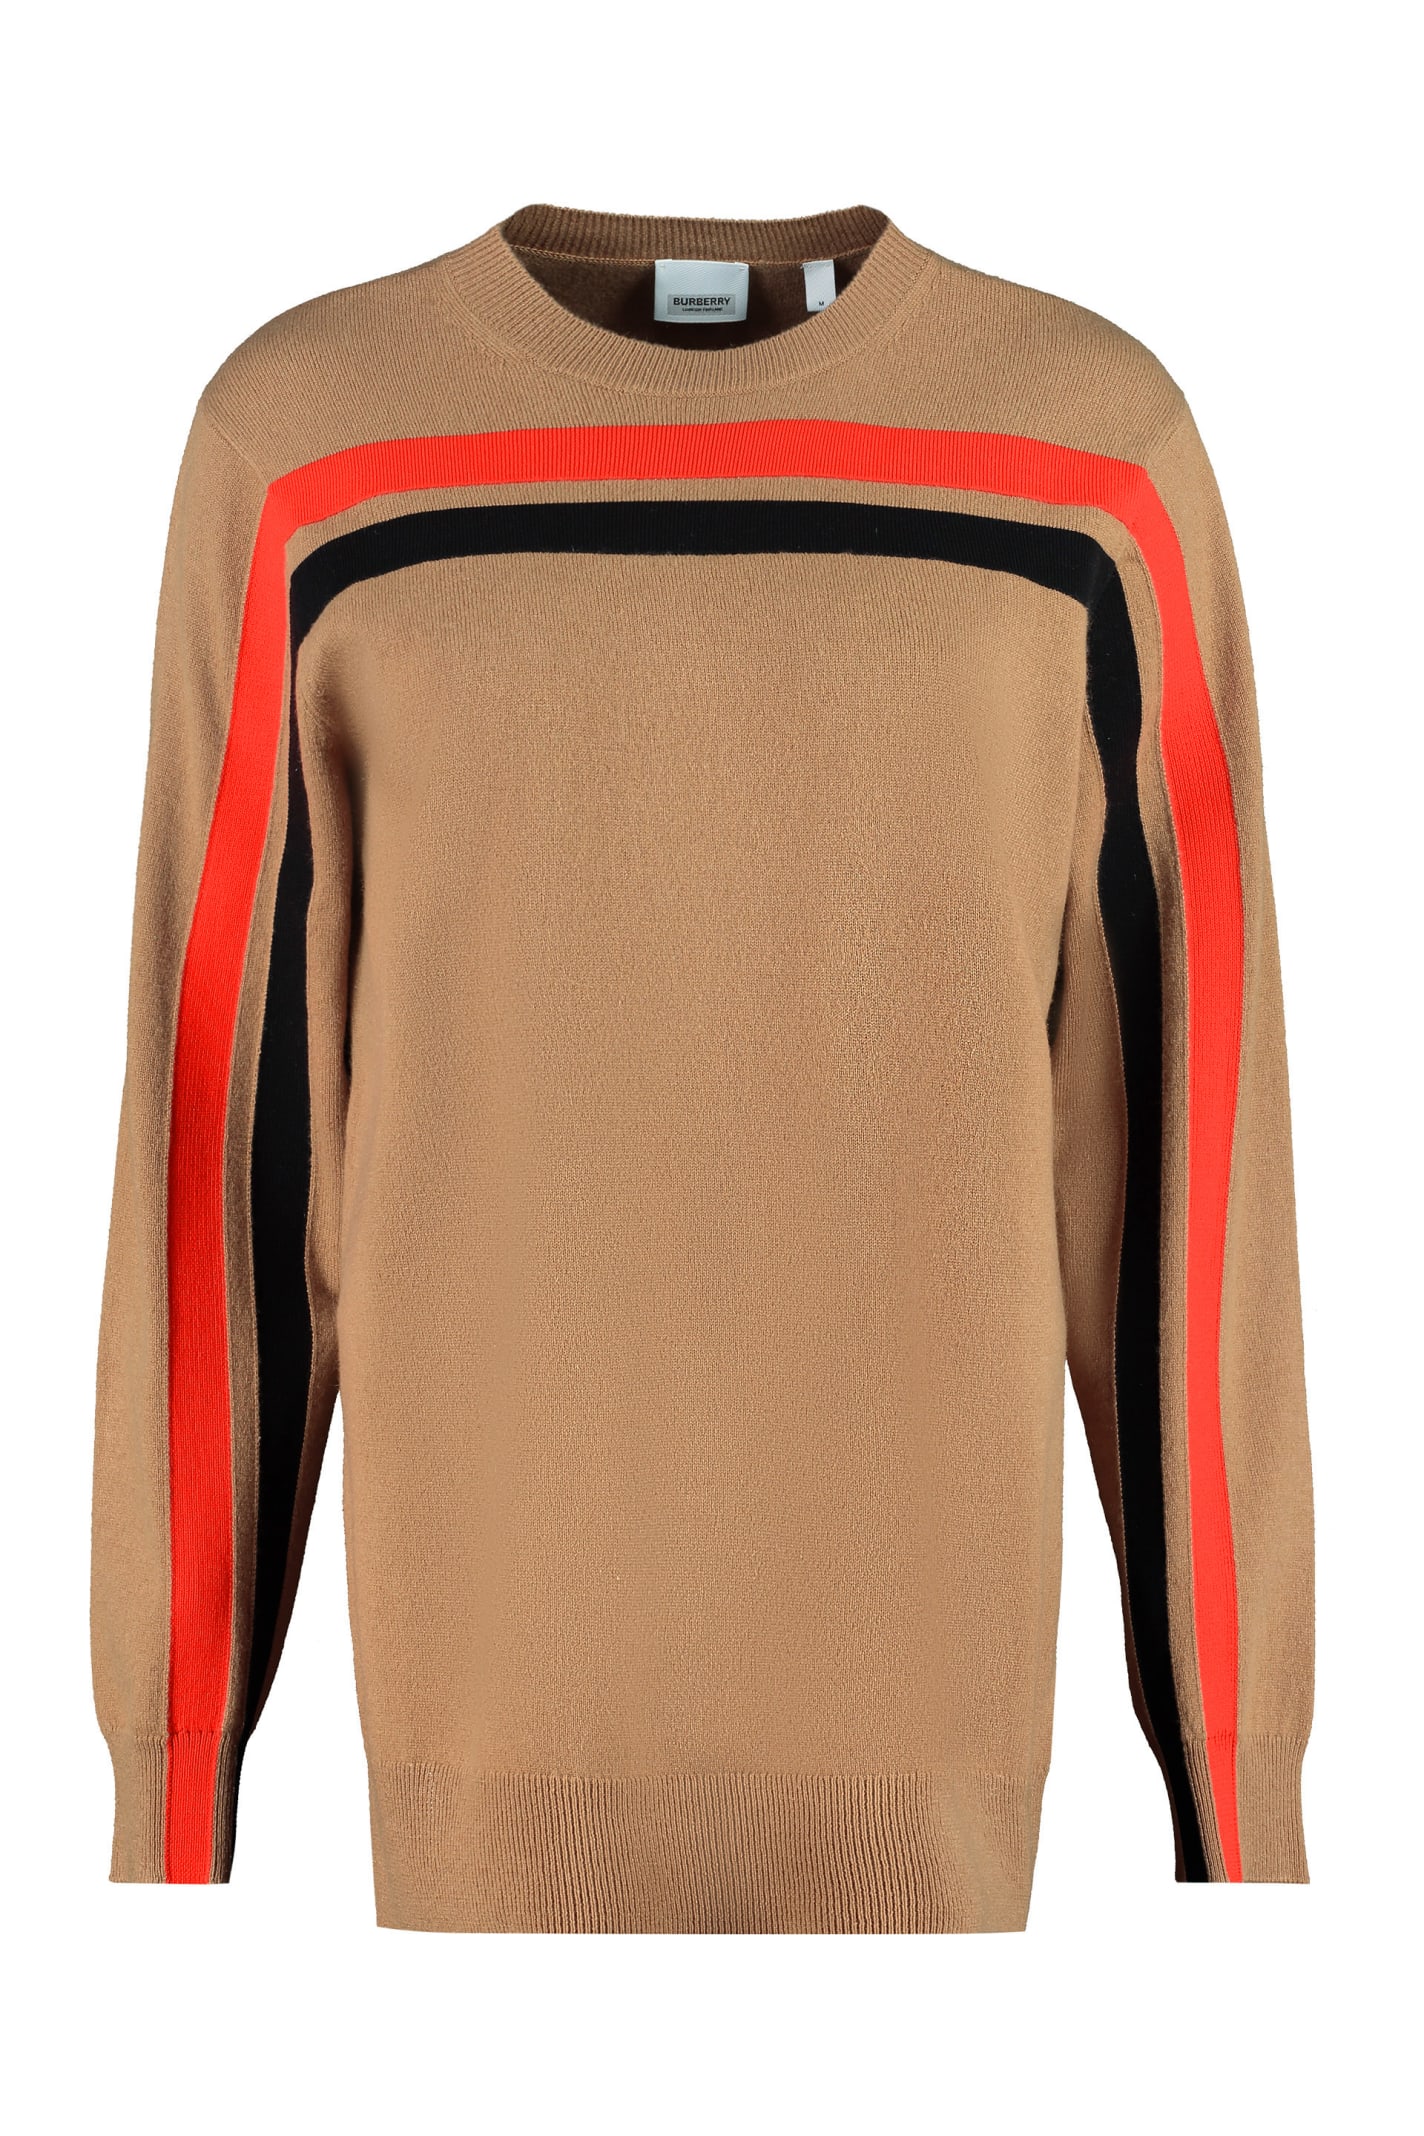 Burberry Cashmere Blend Pullover